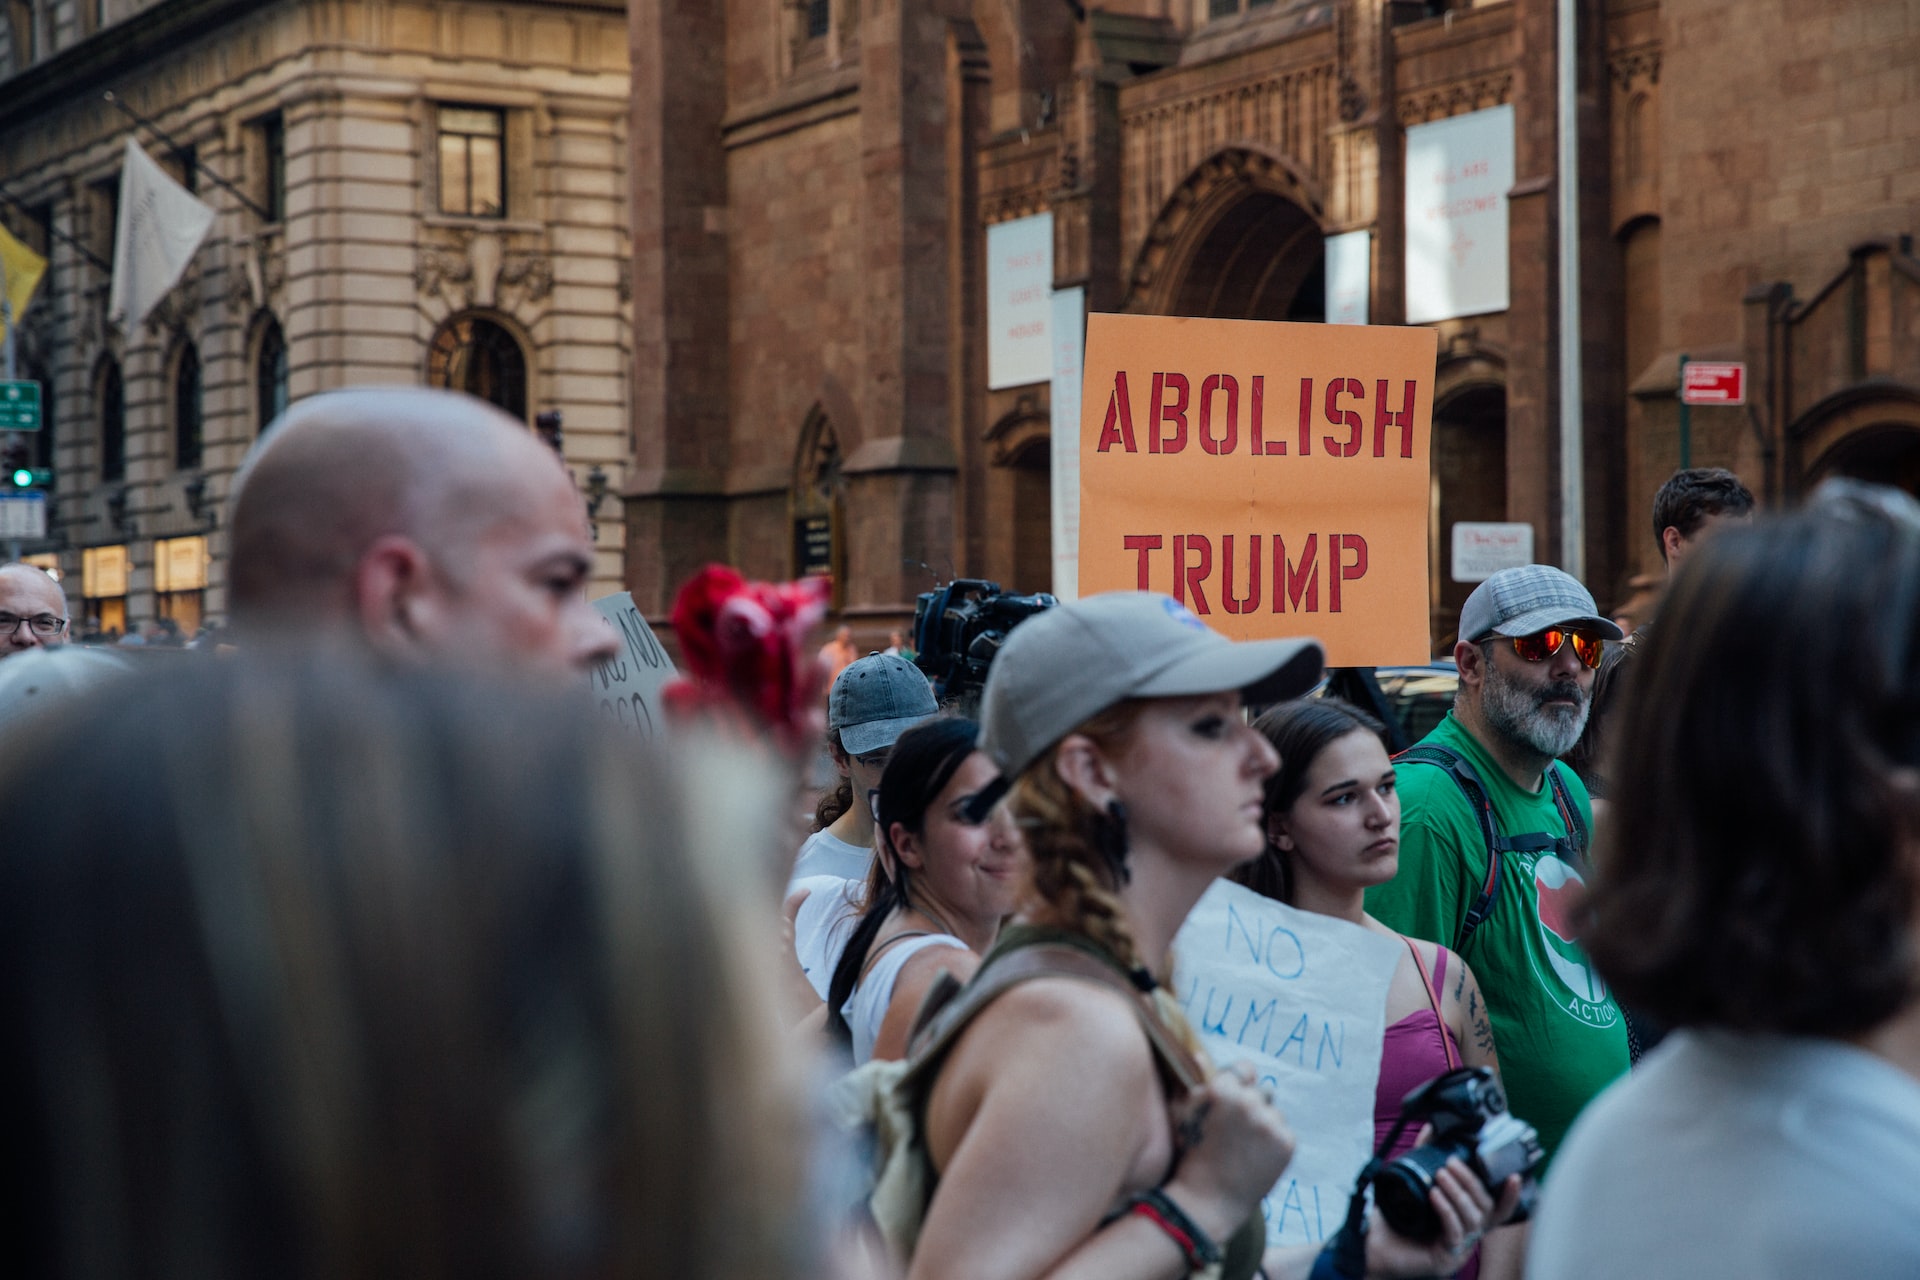 A crowd protesting Donald Trump in New York, with one carrying a sign that says ‘Abolish Trump’